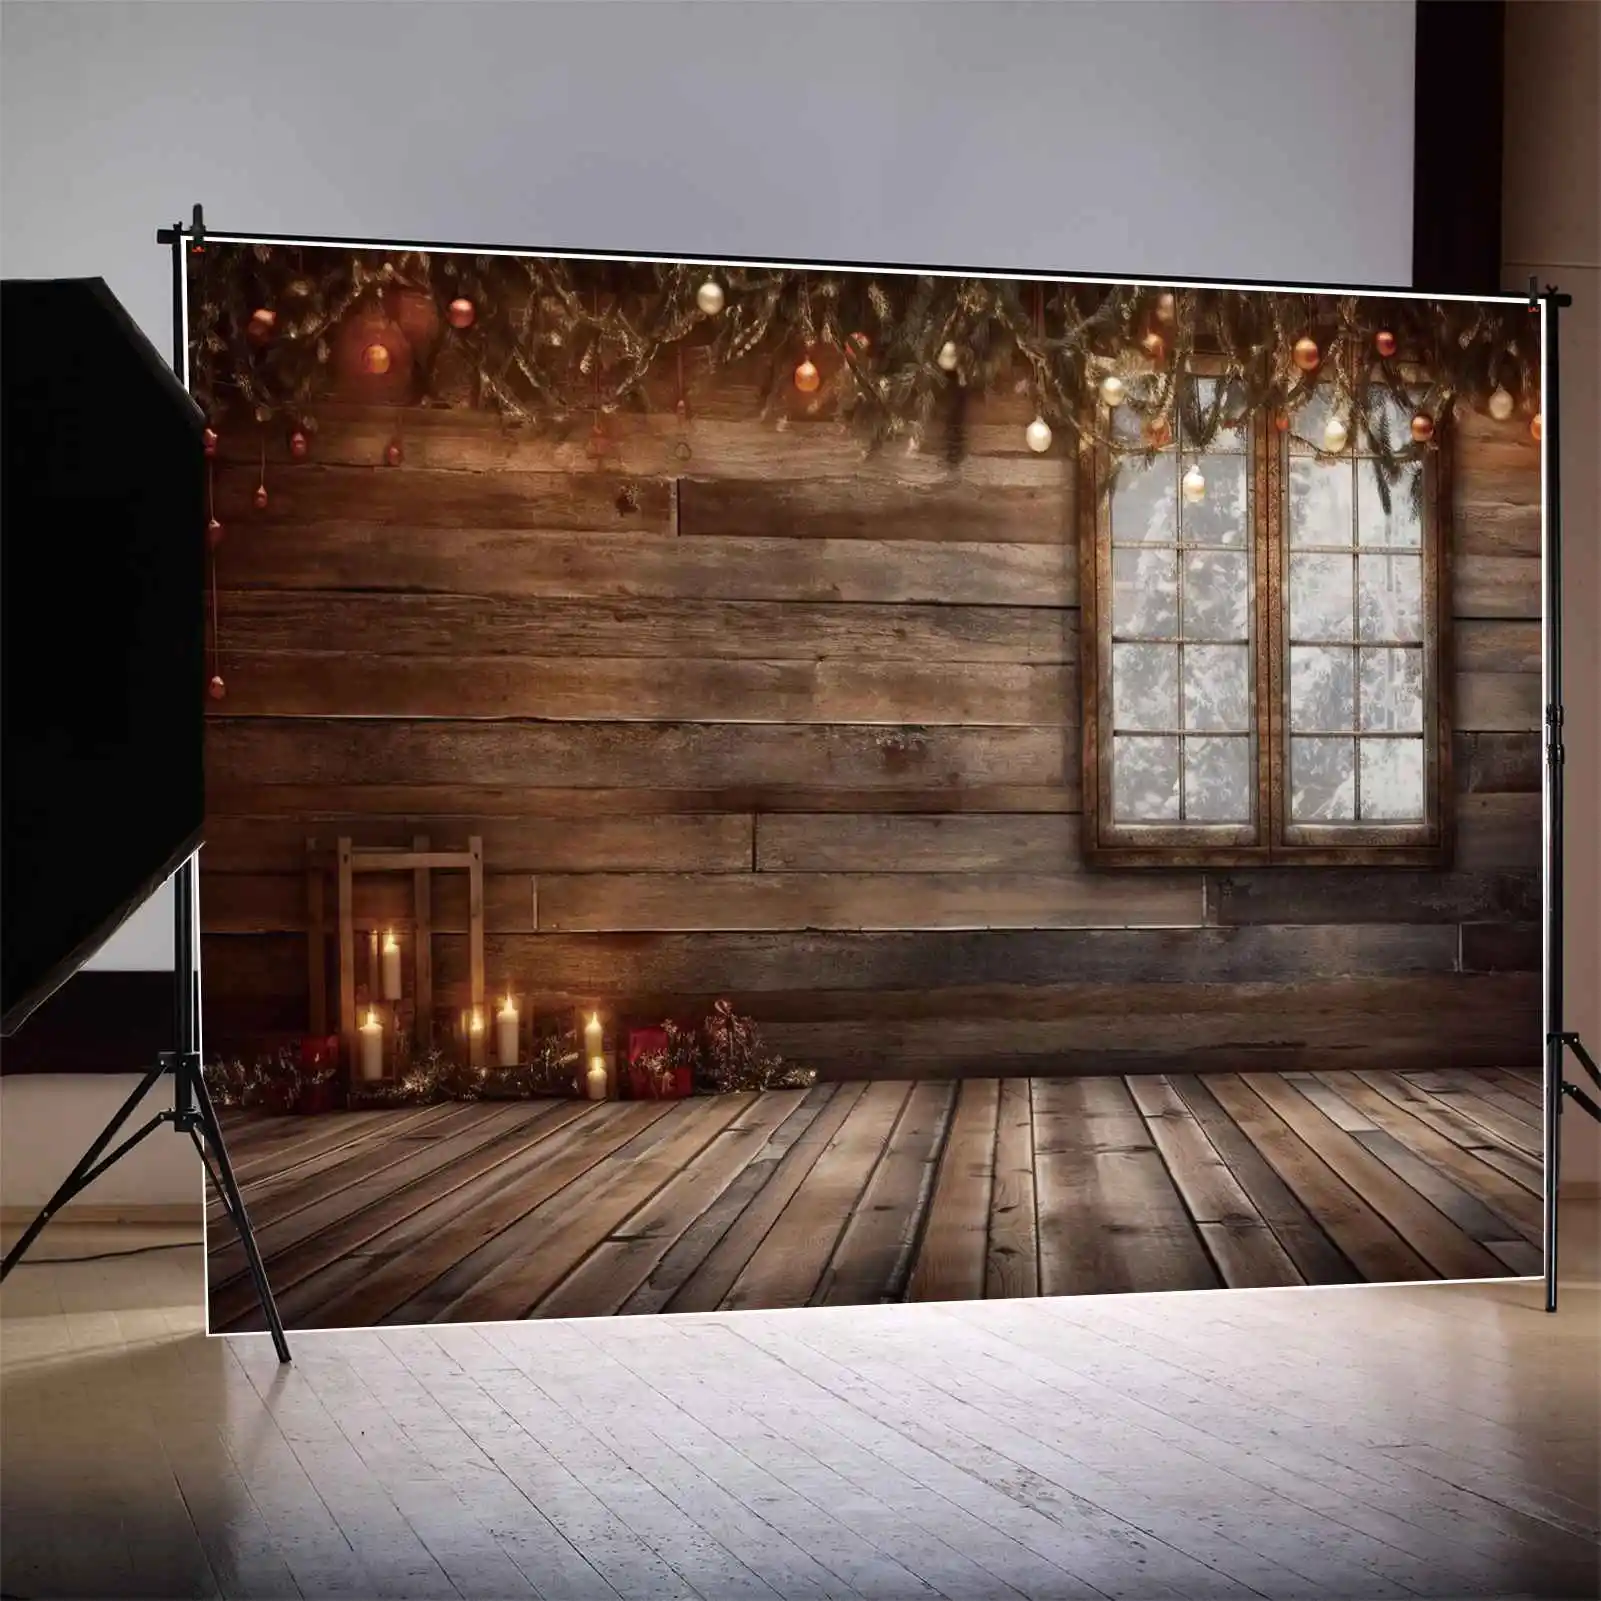 

MOON.QG Backdrop Christmas Wood Plank Wooden Board Wall Floor Home Window Background Candle Lights Balls Pine Party Photo Booth